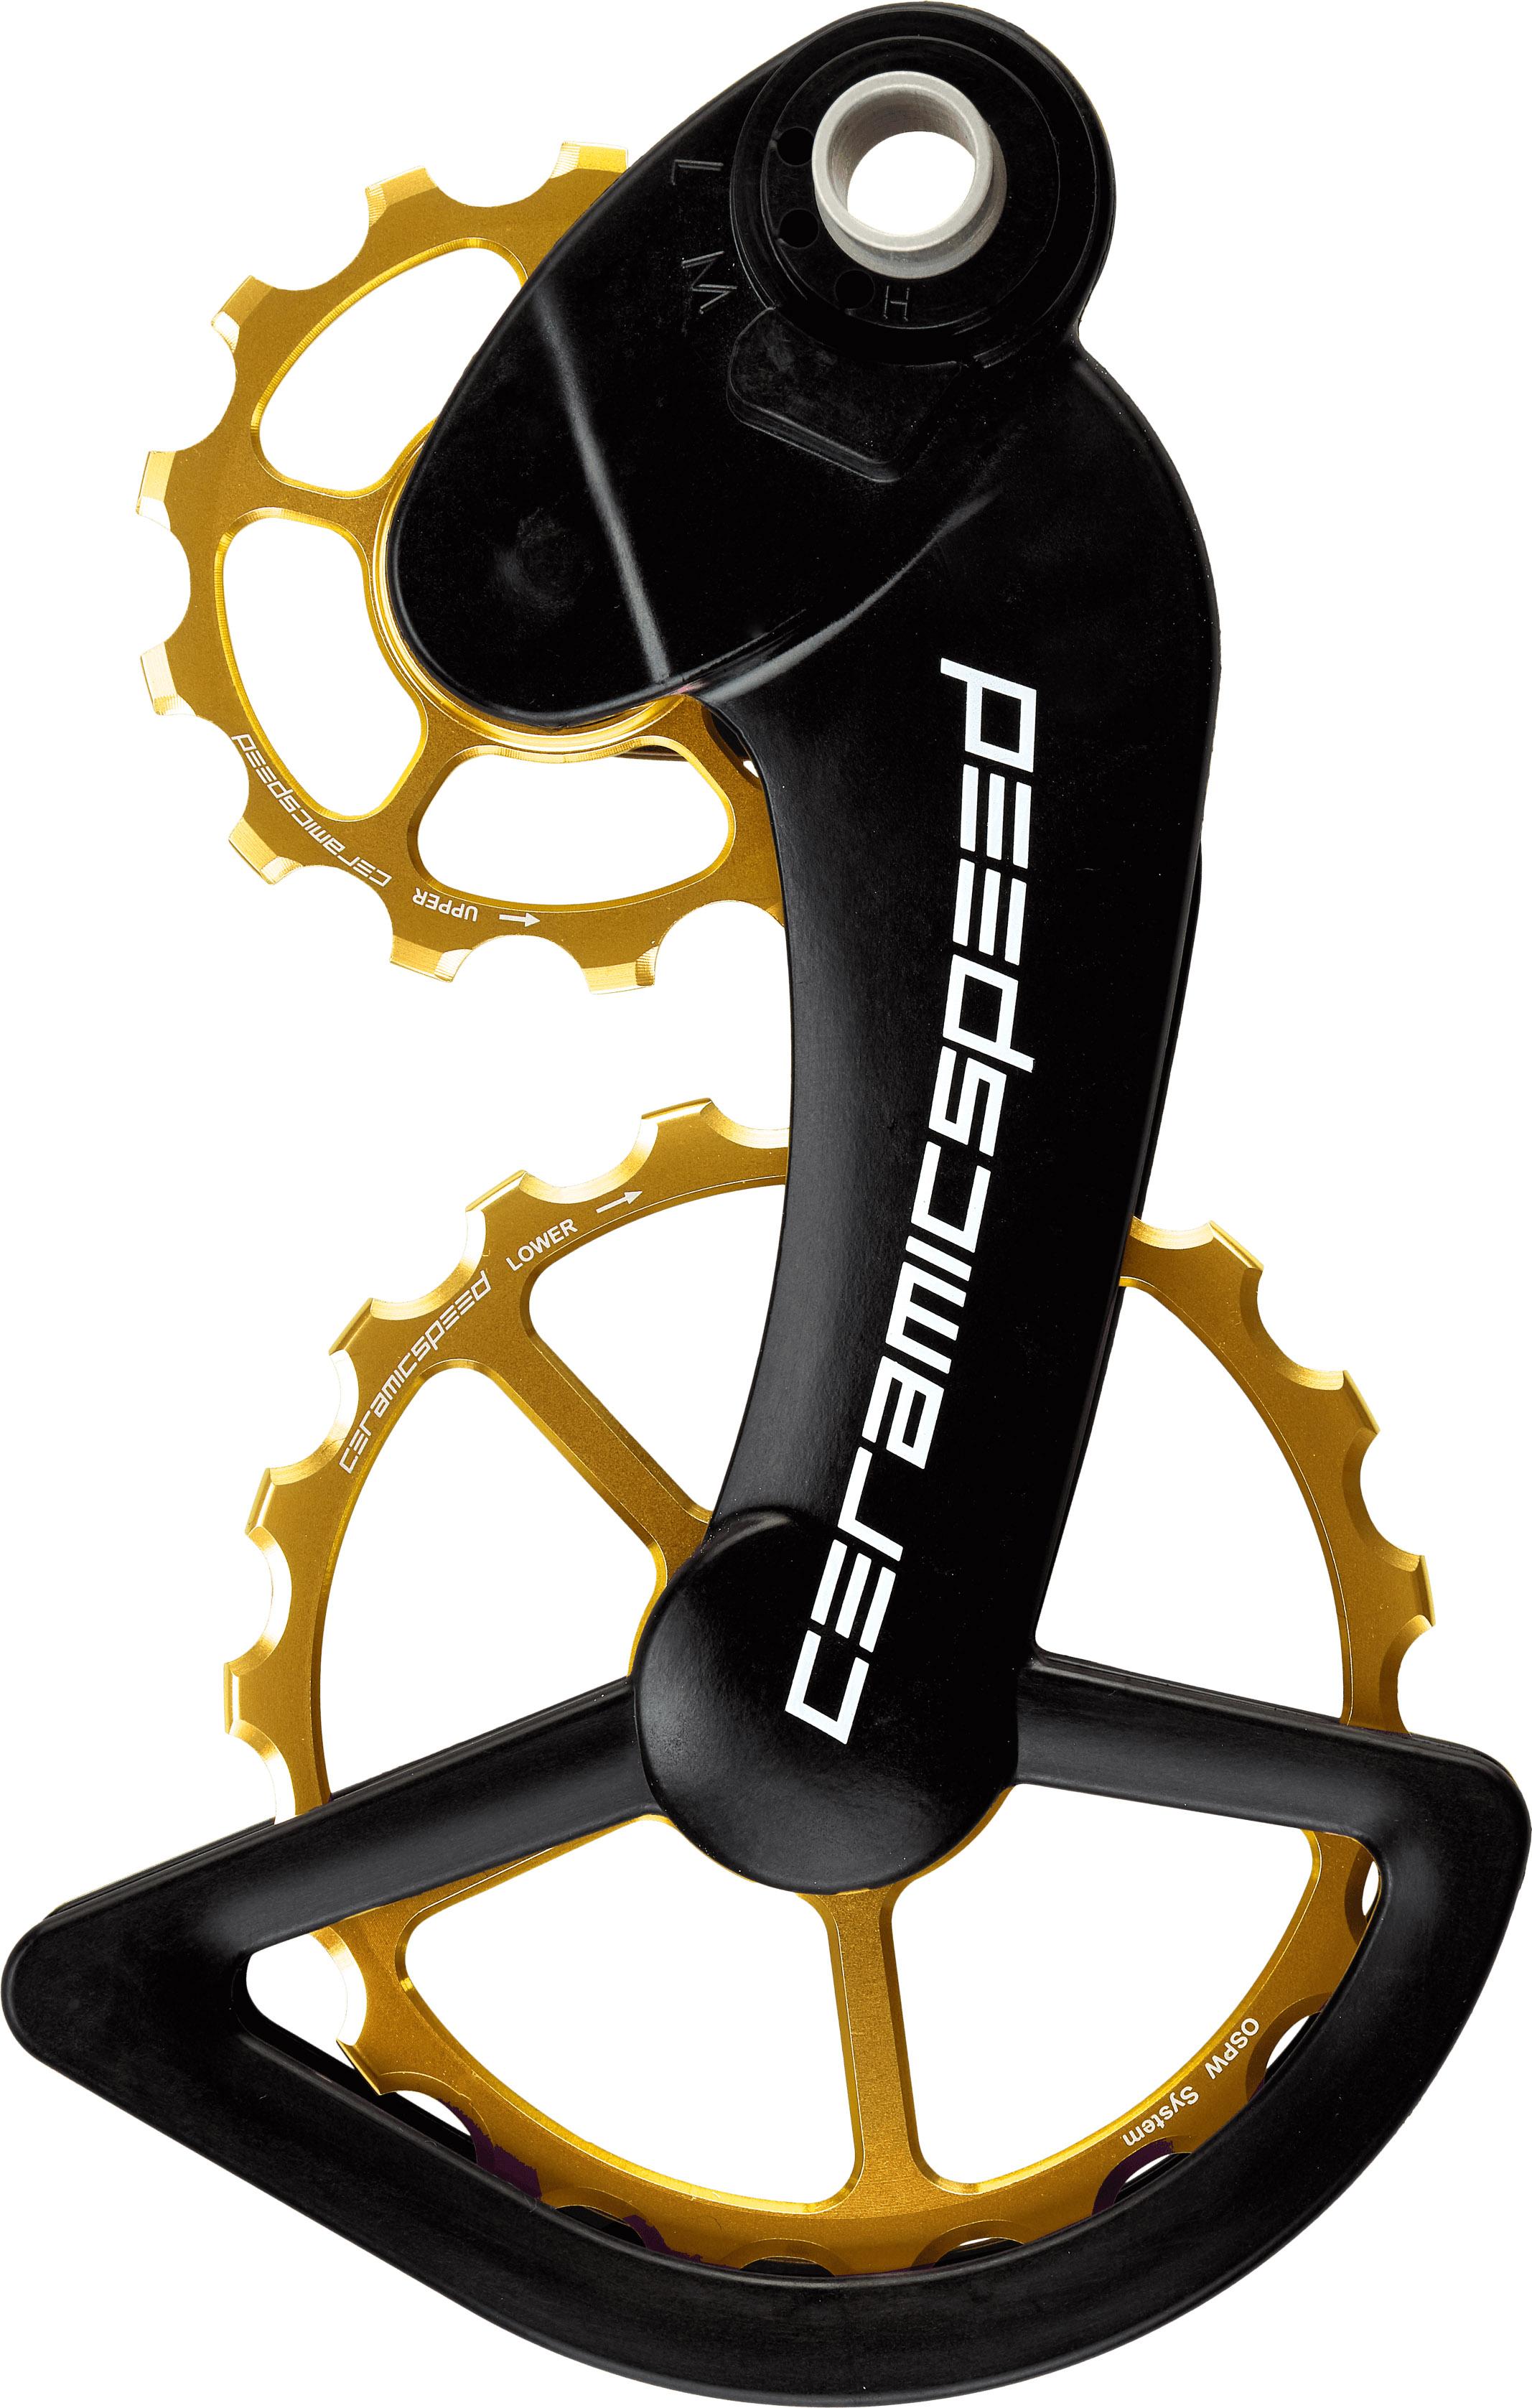 Ceramicspeed Ospw Campagnolo Coated  Gold